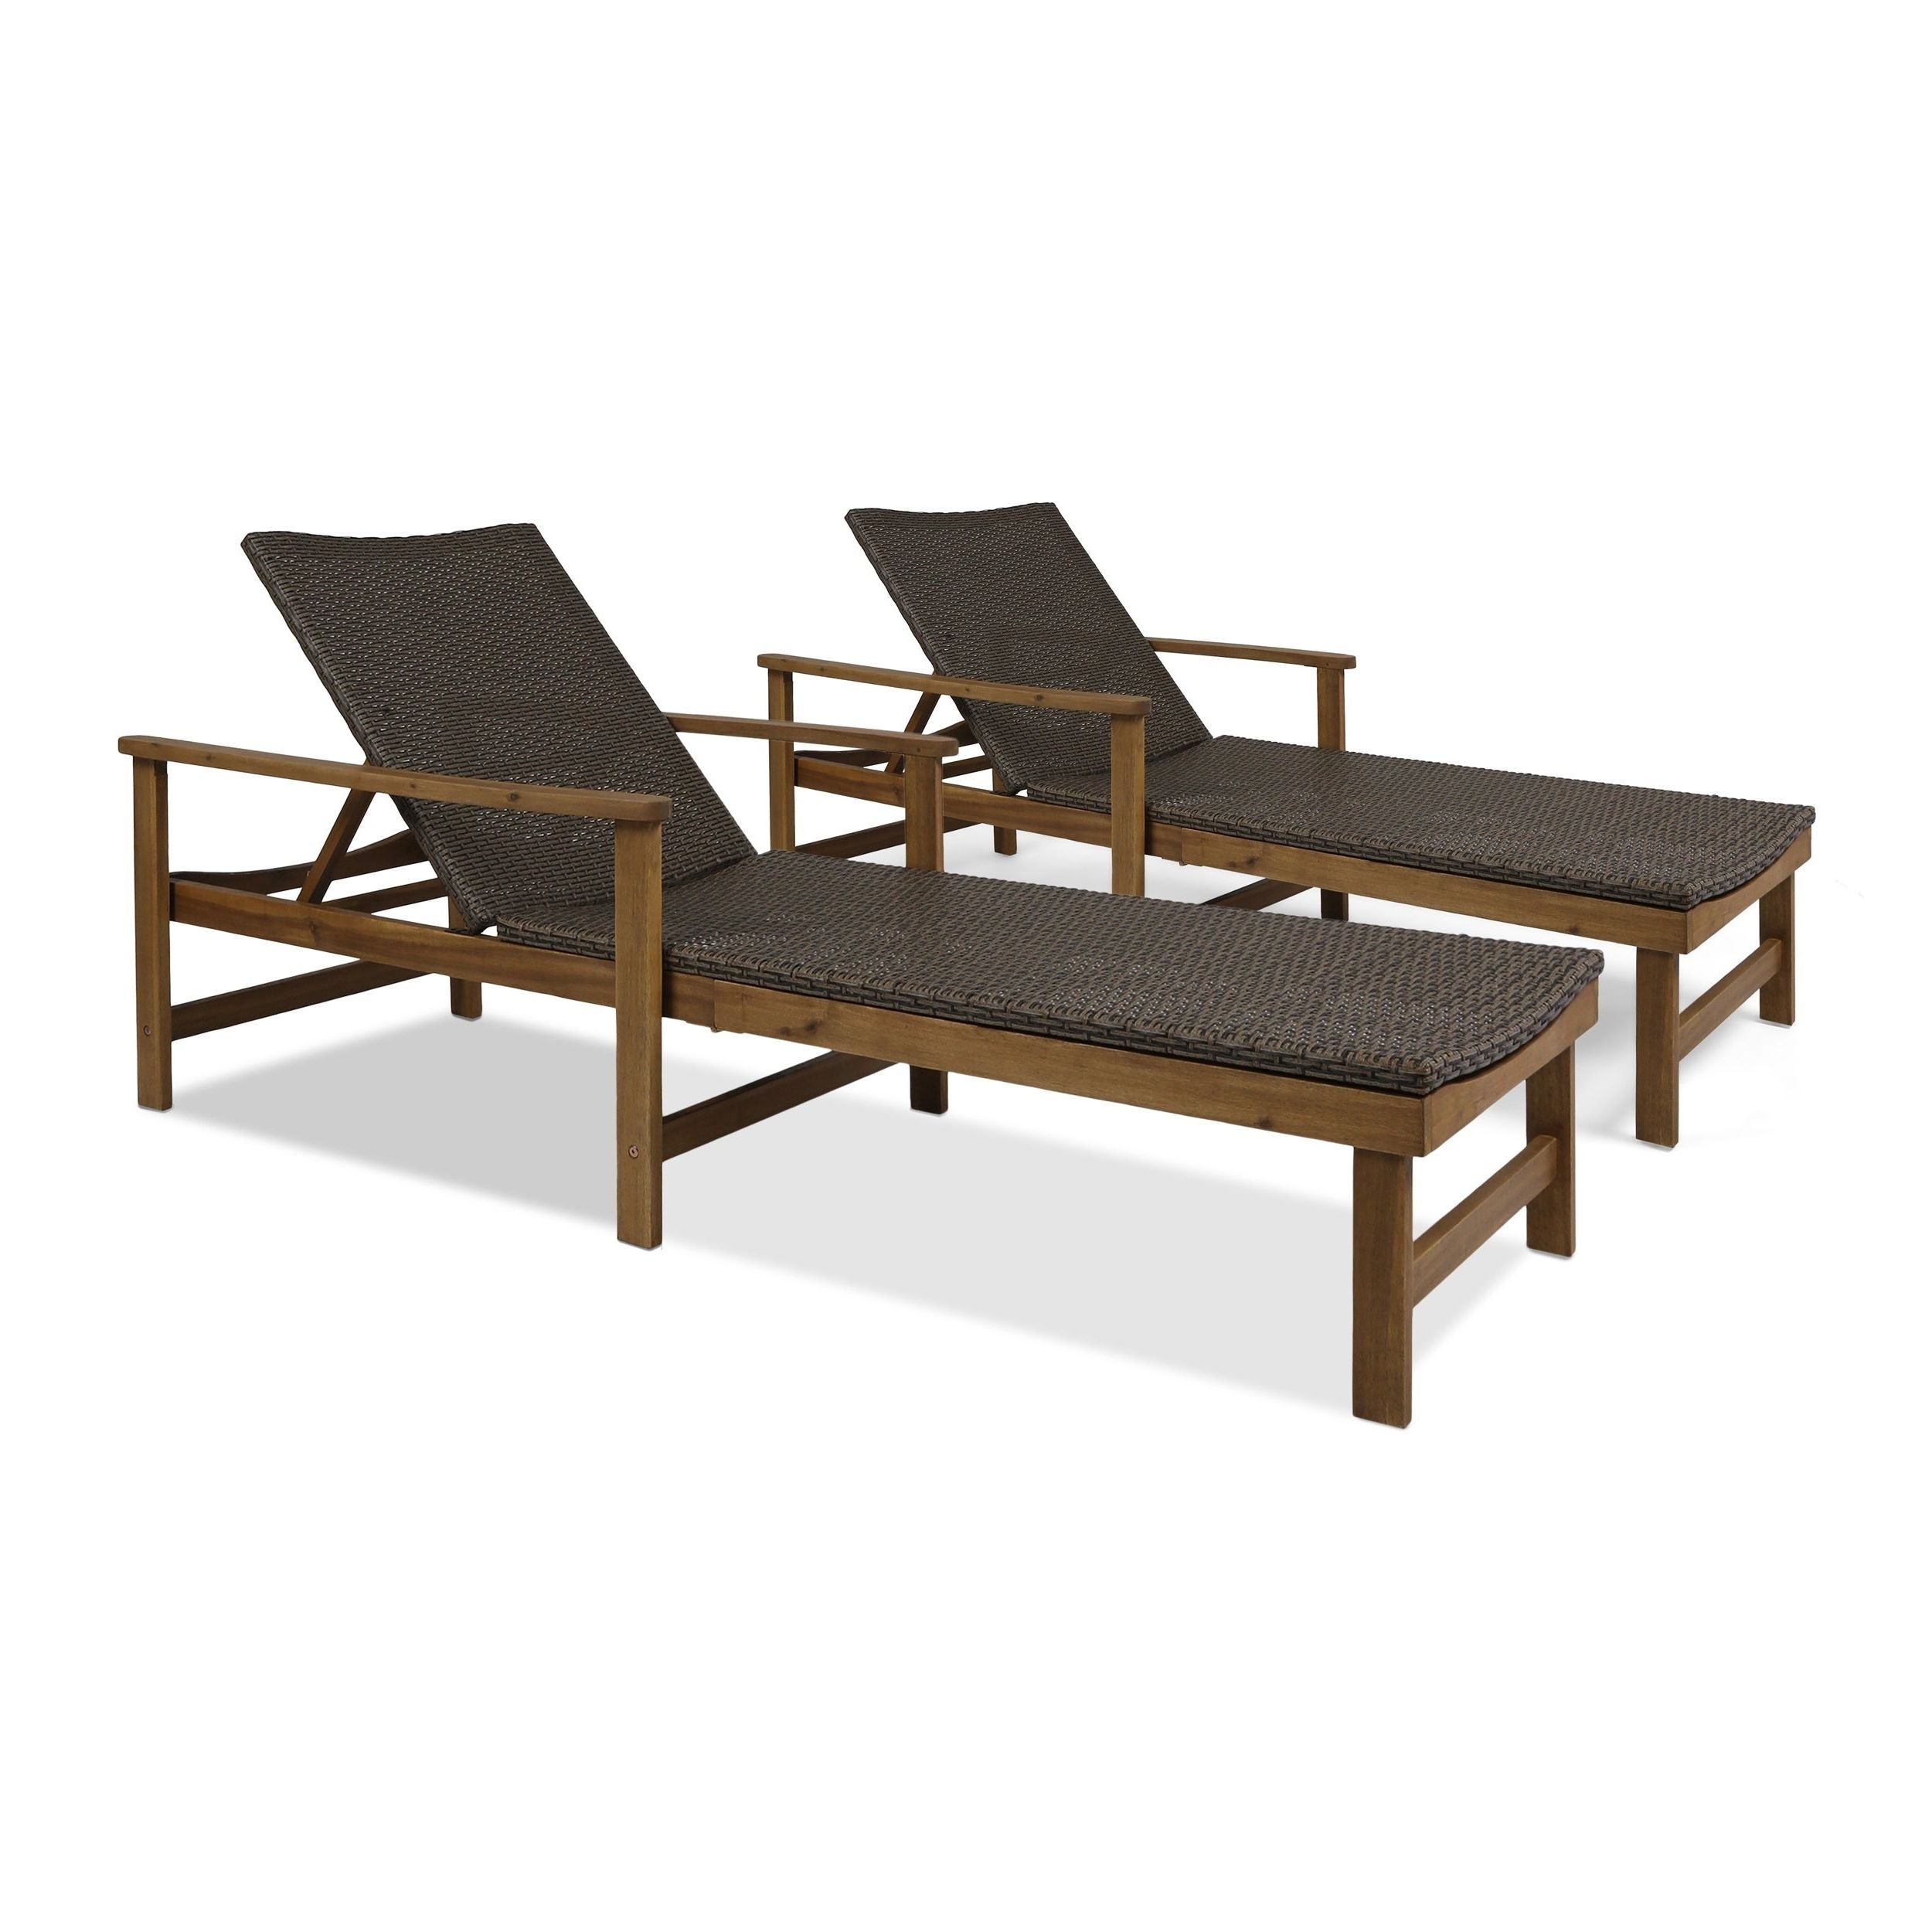 Best And Newest Hampton Outdoor Chaise Lounges Acacia Wood And Wicker (set Of 2) Christopher Knight Home Within Outdoor Rustic Acacia Wood Chaise Lounges With Wicker Seat (View 5 of 25)